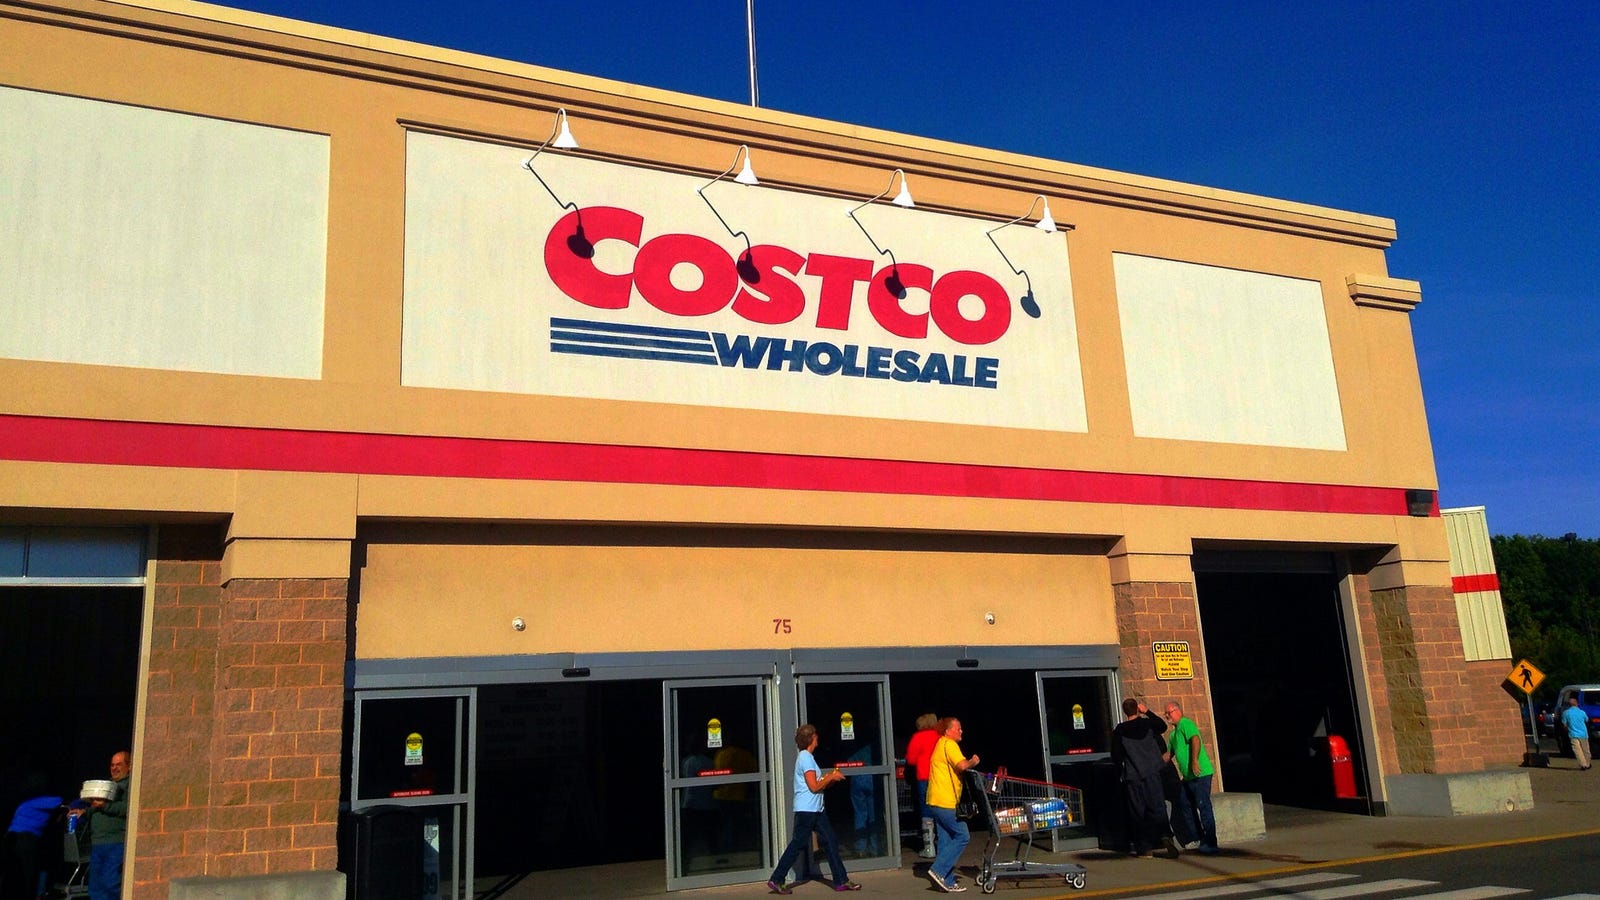 Costco Launches Grocery Delivery Program to Compete With ...